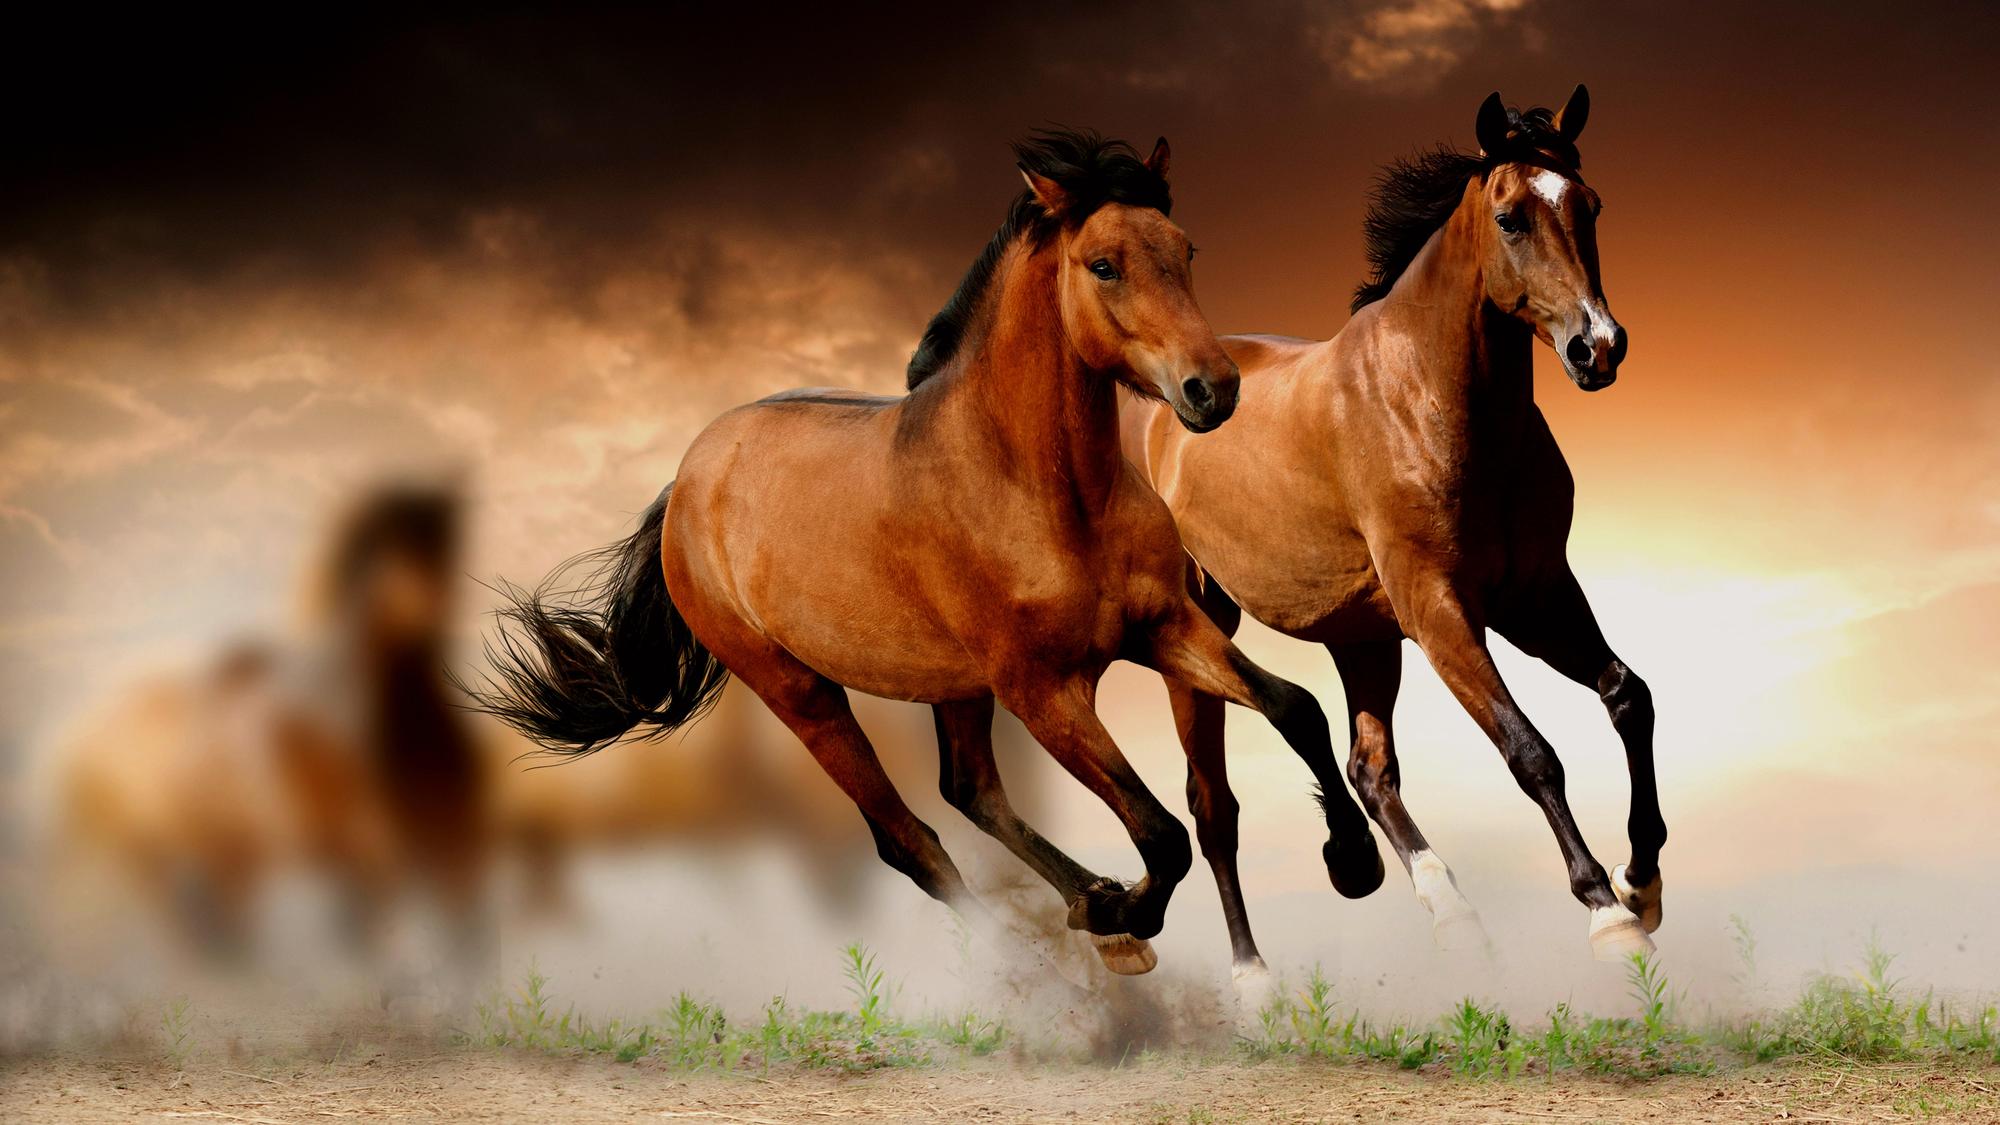 Horse Free Download - Horse Hd Images Free Download , HD Wallpaper & Backgrounds